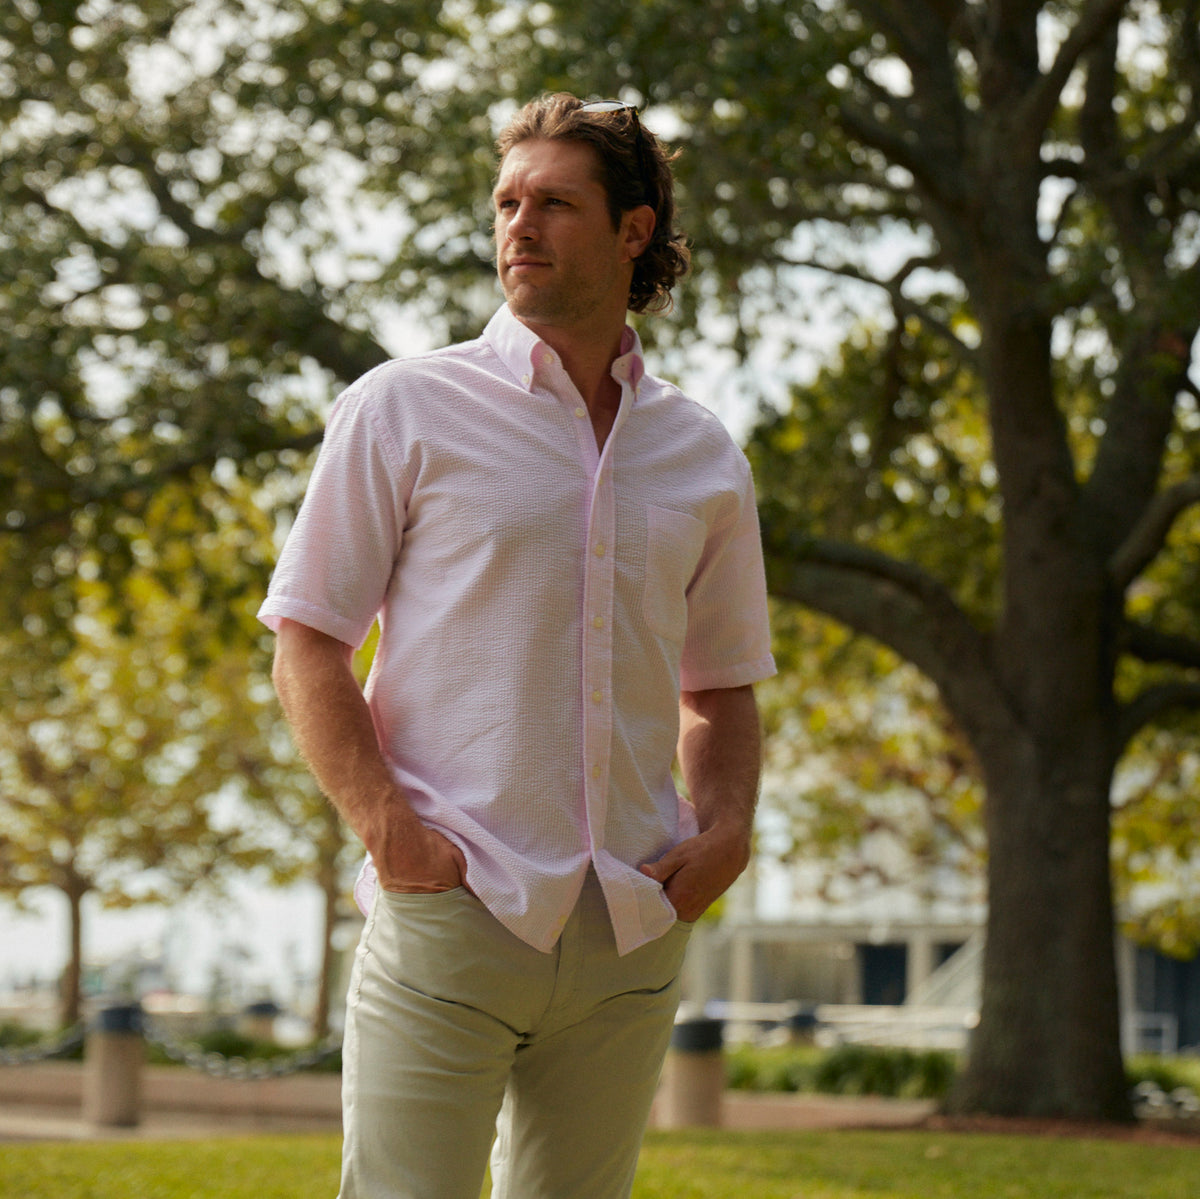 Seersucker all year long in a soft pink seersucker shirt. Subtle, lightweight, and a texture they begs a second look.  100% Cotton Seersucker • Button Down Collar • Short Sleeve • Chest Pocket • Machine Washable • Imported